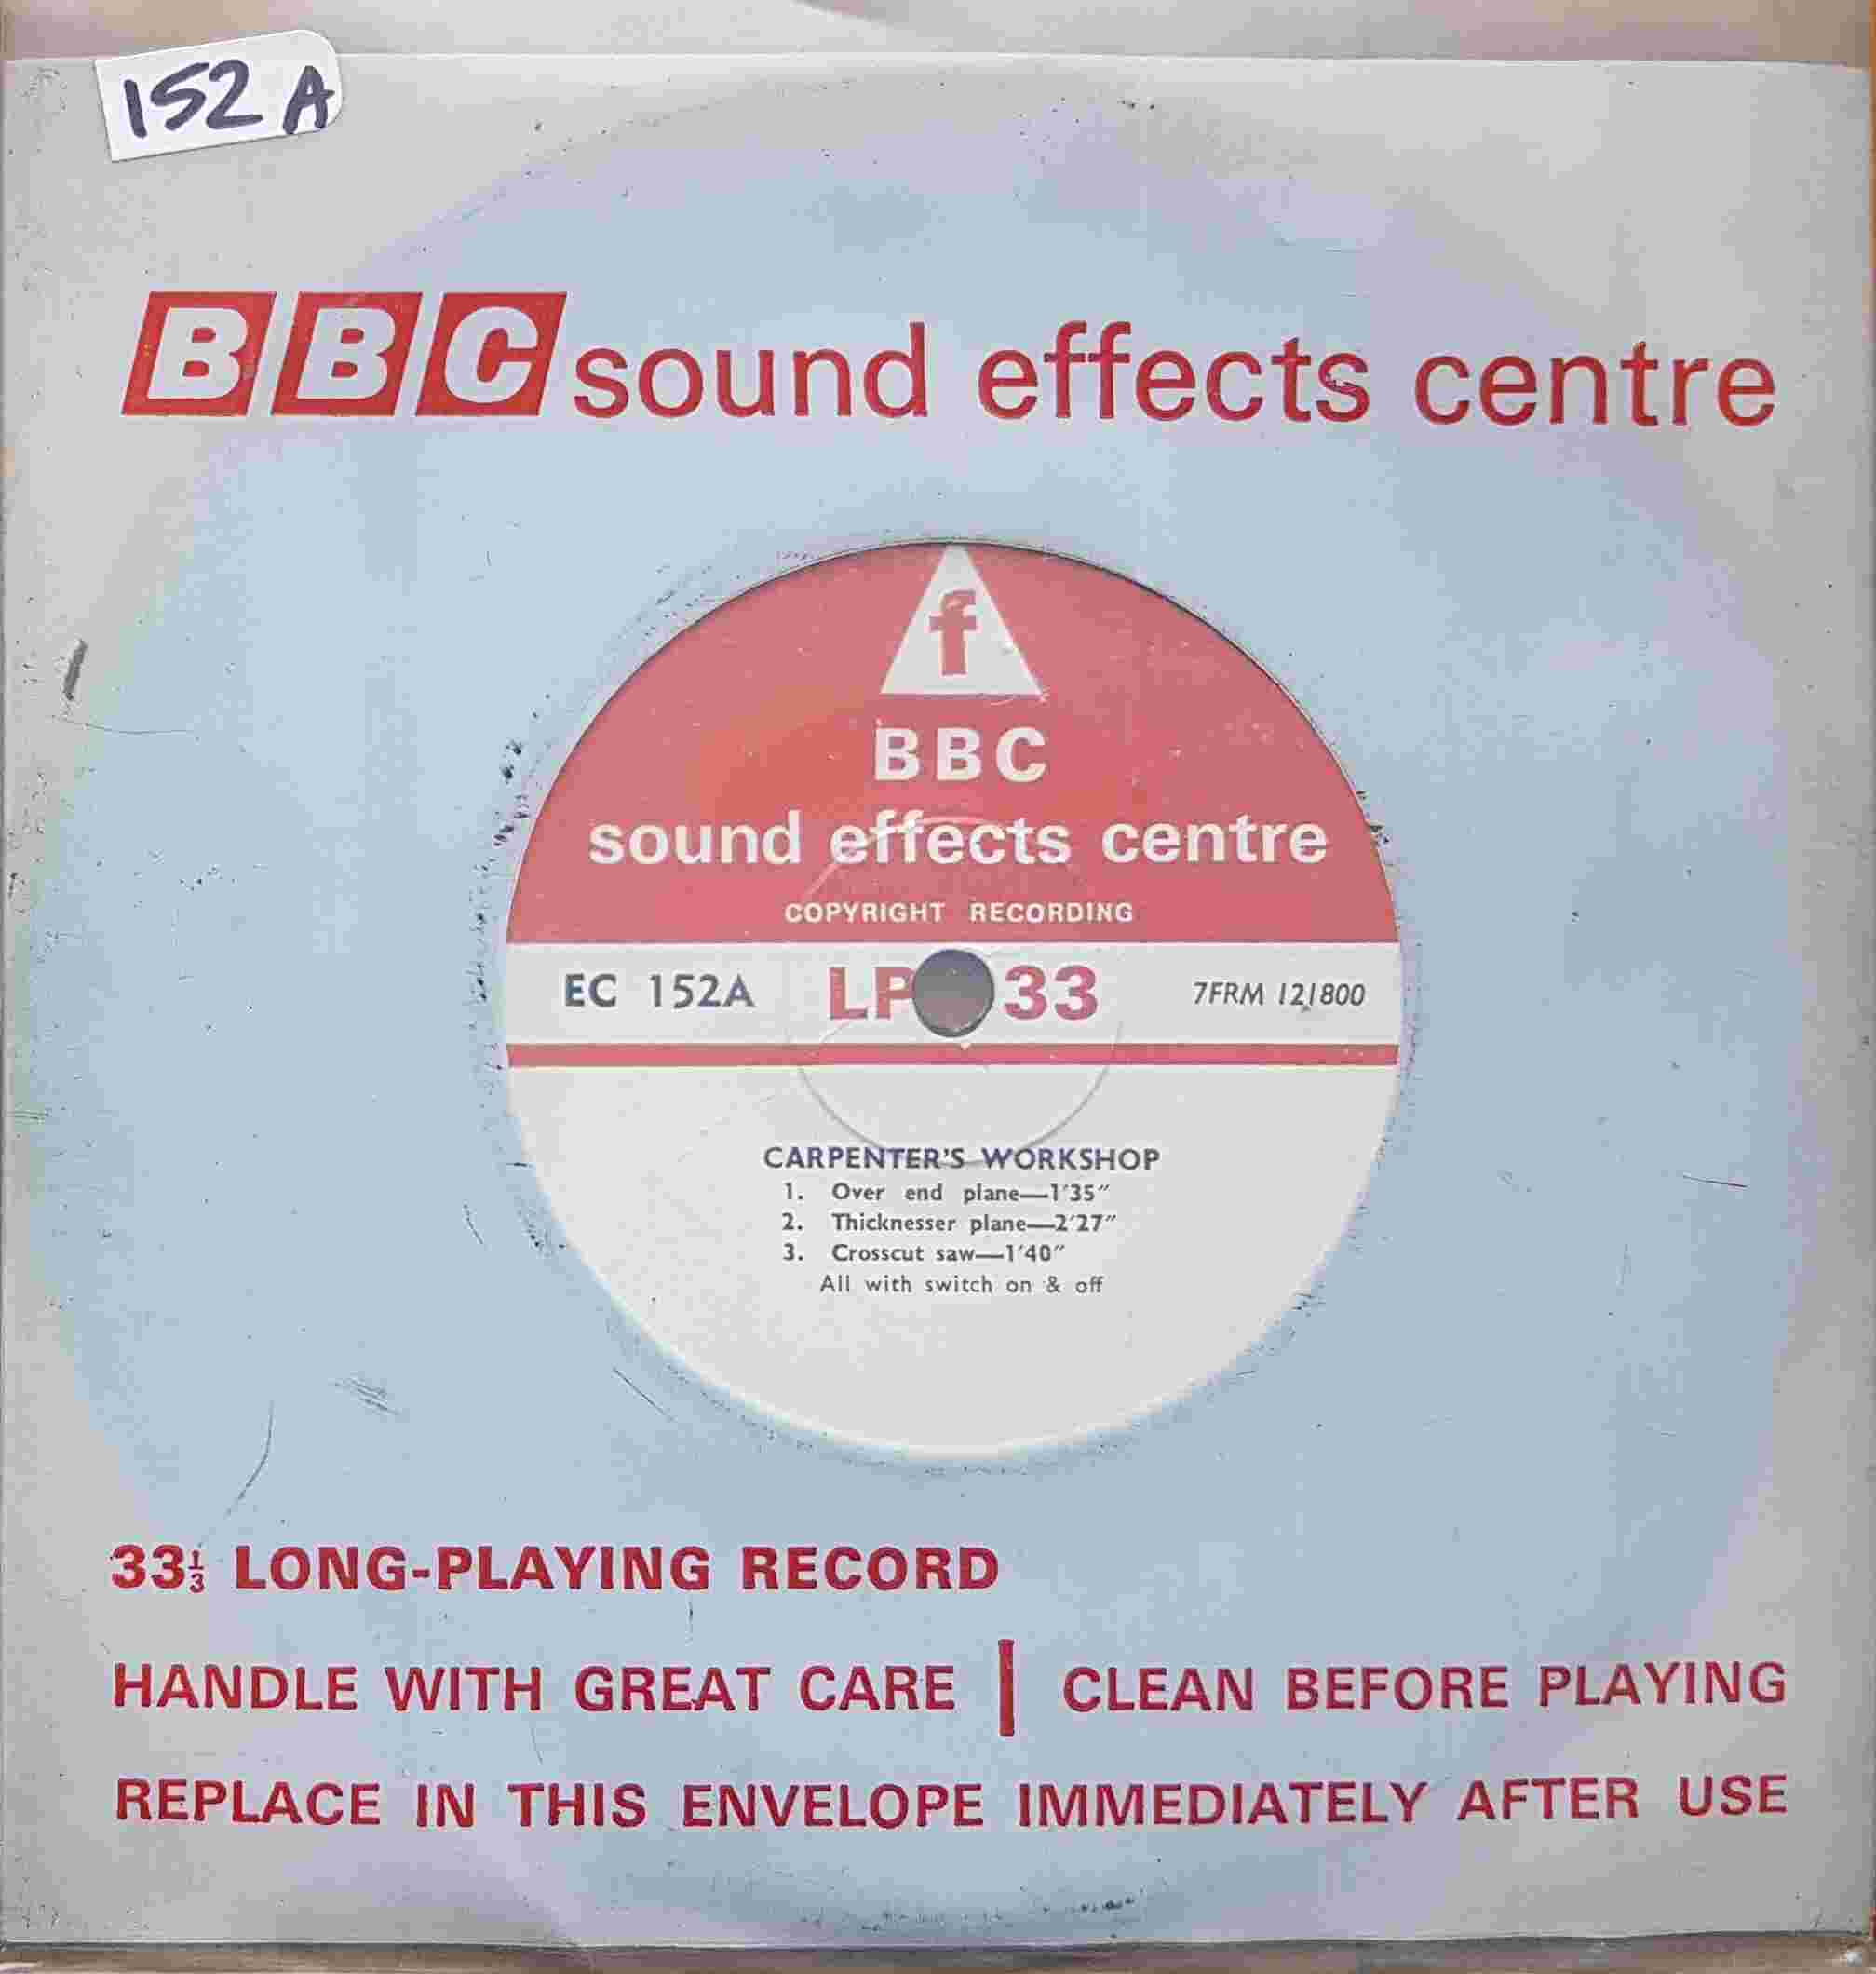 Picture of EC 152A Carpenter's workshop (All with switch on & off) by artist Not registered from the BBC singles - Records and Tapes library